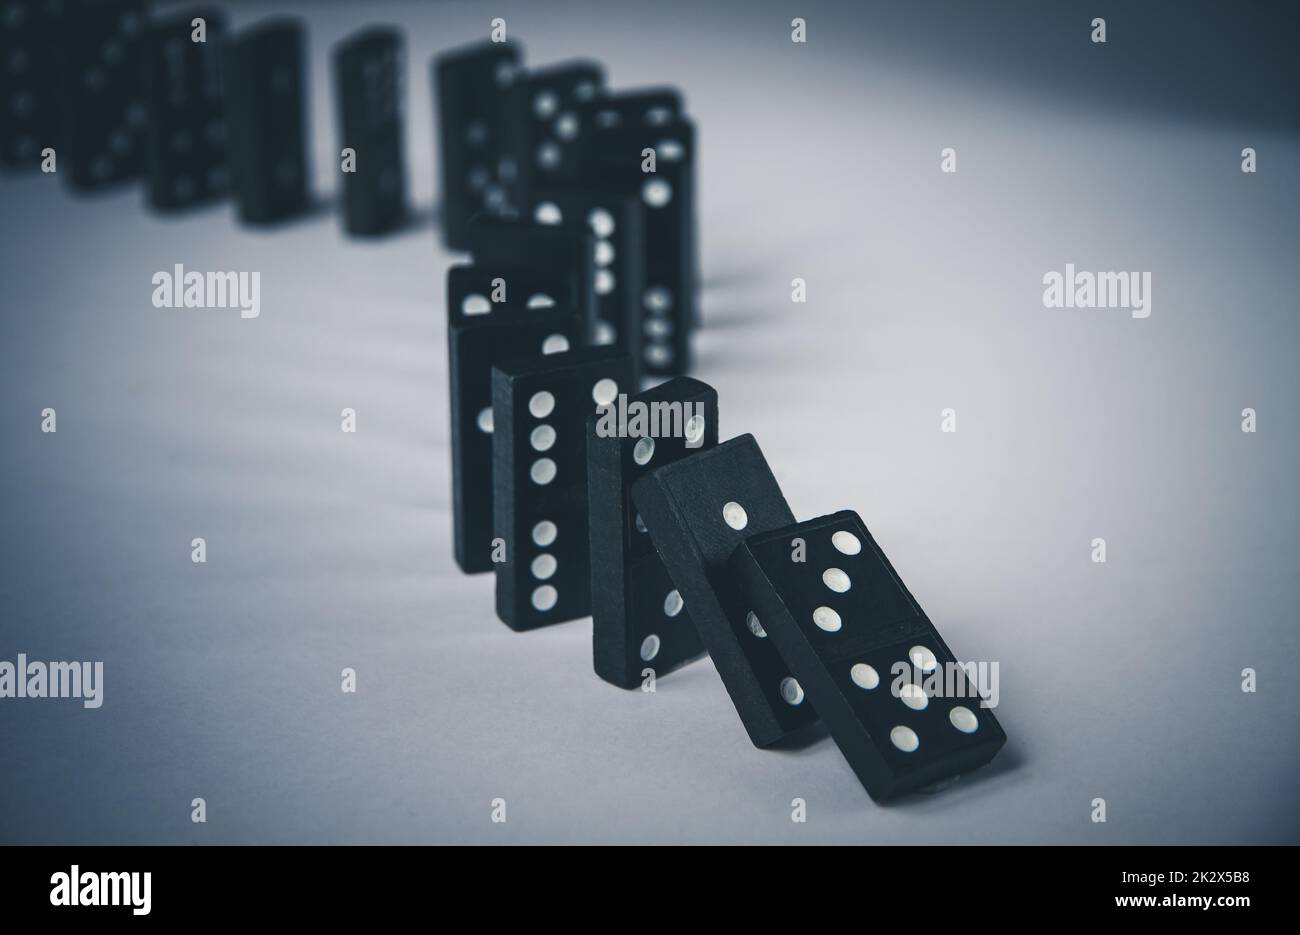 Black dominoes chain on table background Stock Photo